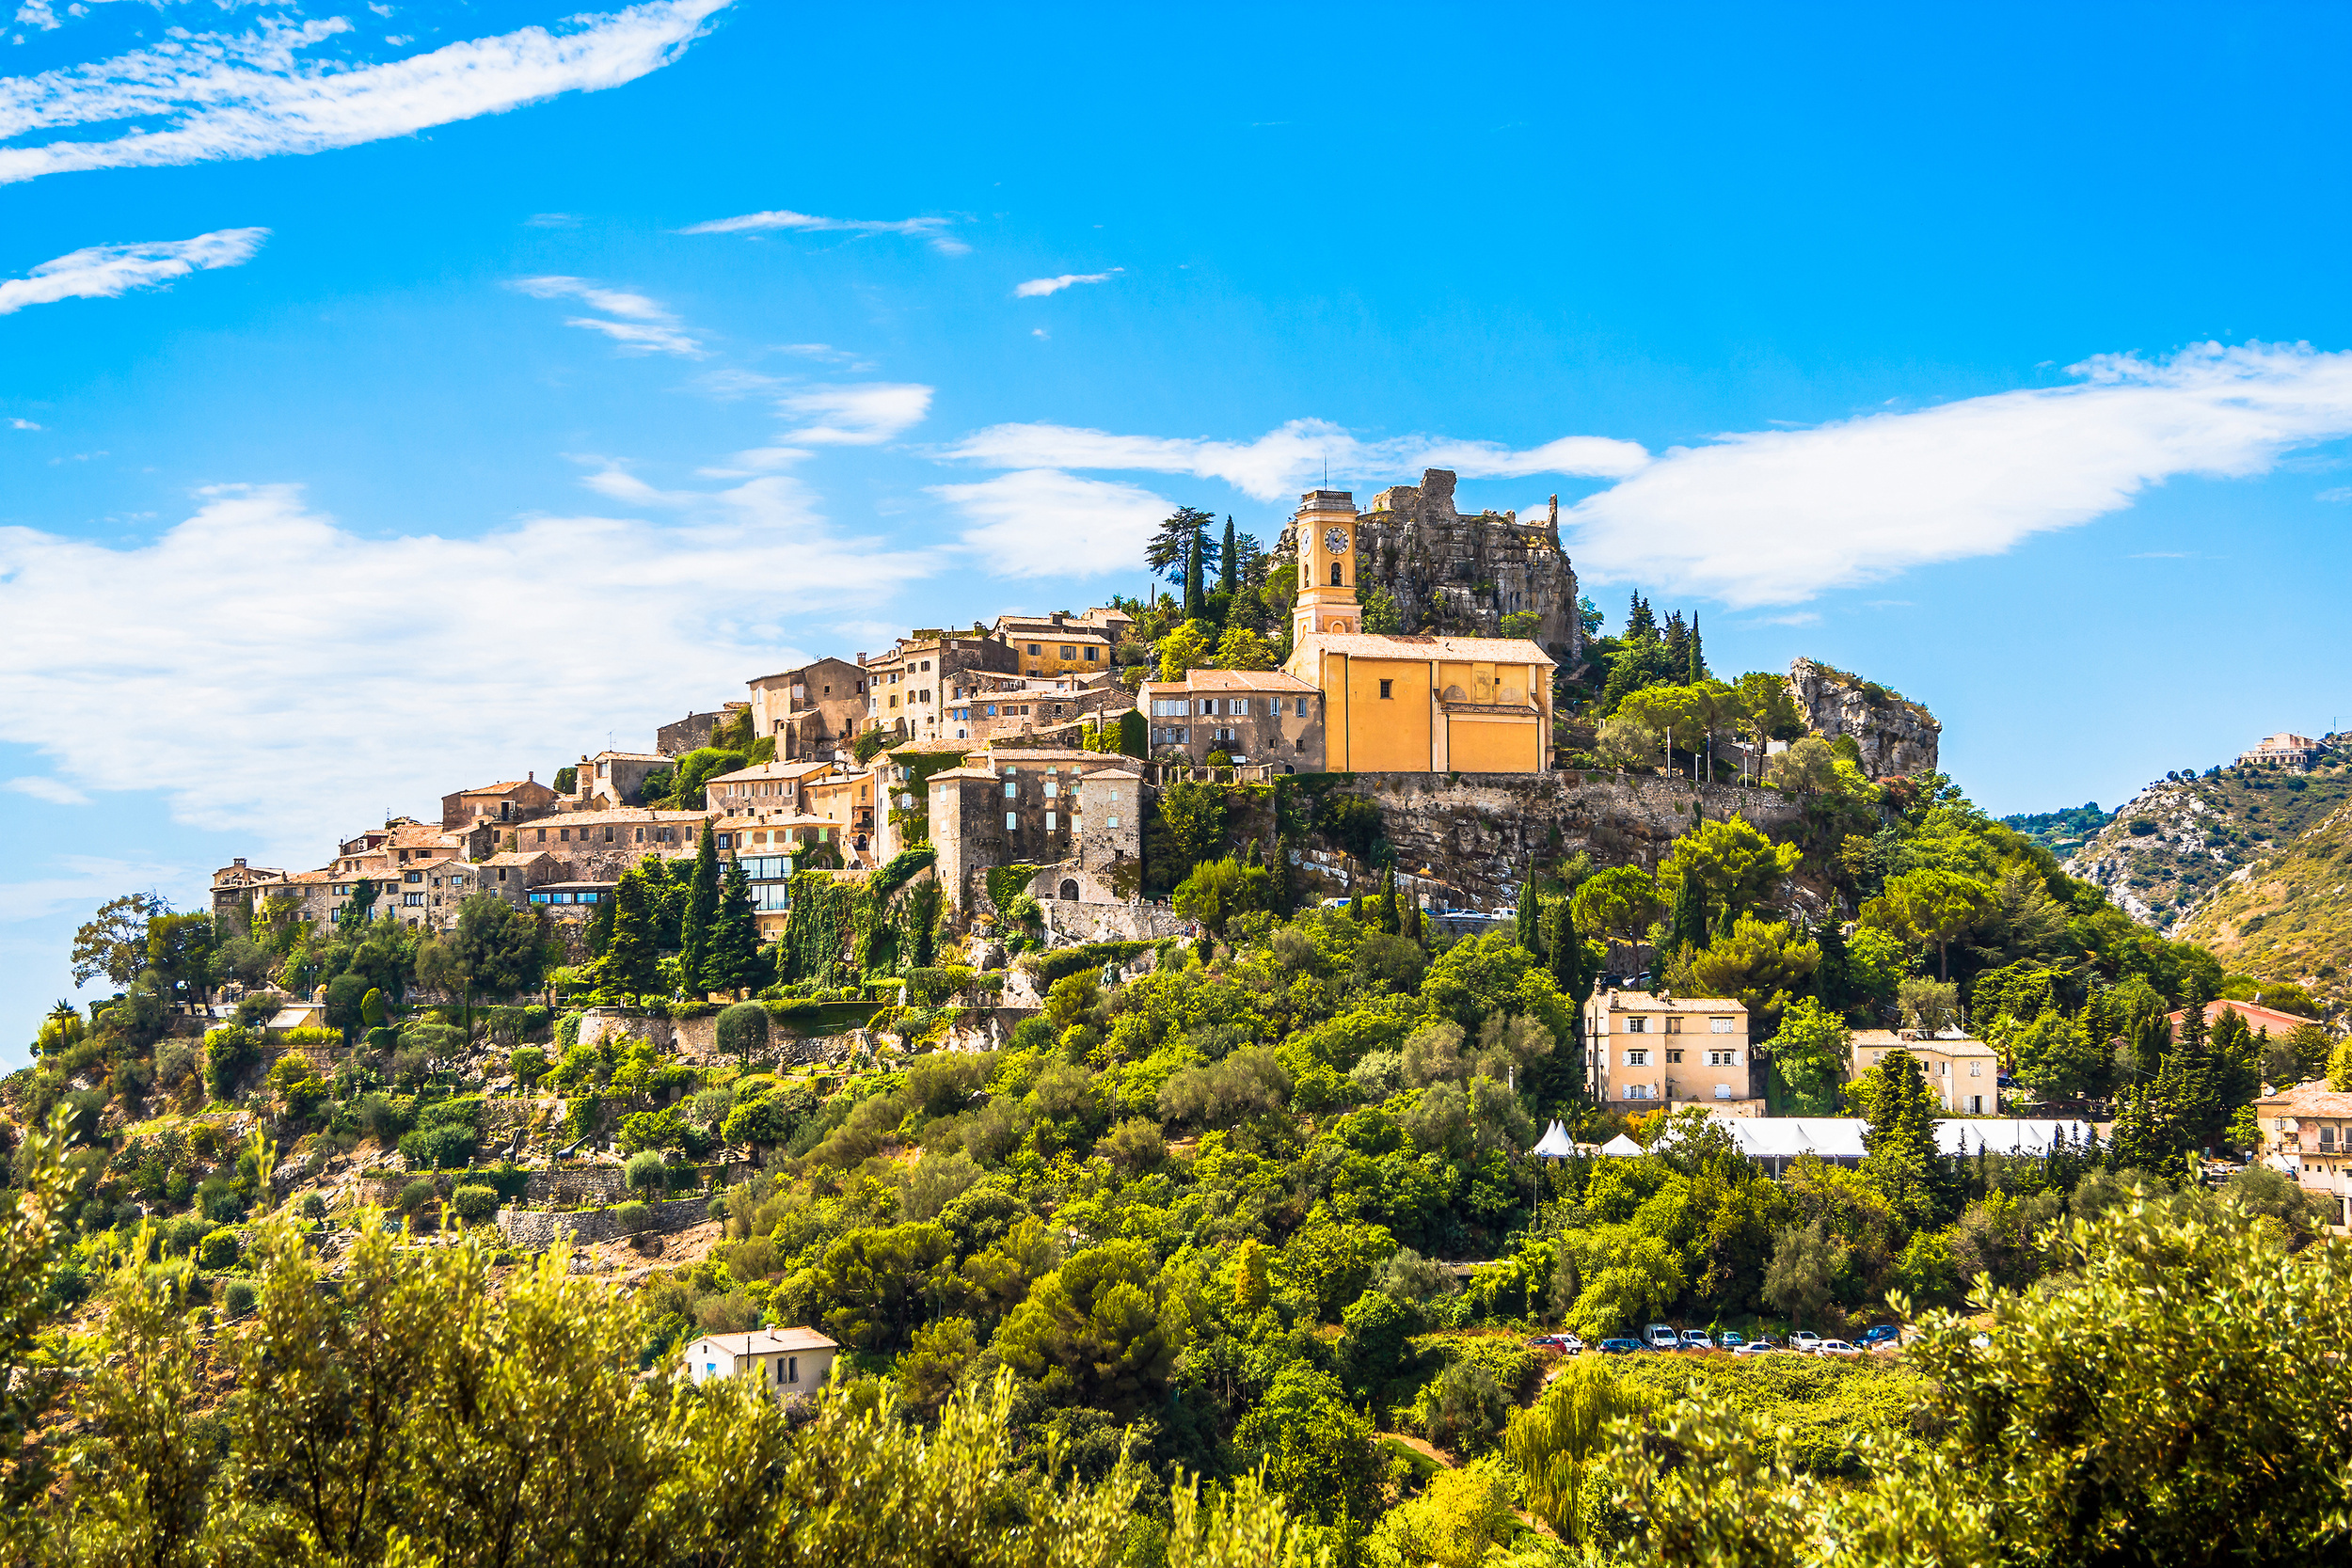 <p>Eze is a fantastic medieval town in the mountains above the Mediterranean. It's located a 15-minute train ride from Nice and is a great day trip!</p><p><a href='https://www.msn.com/en-us/community/channel/vid-cj9pqbr0vn9in2b6ddcd8sfgpfq6x6utp44fssrv6mc2gtybw0us'>Follow us on MSN to see more of our exclusive lifestyle content.</a></p>